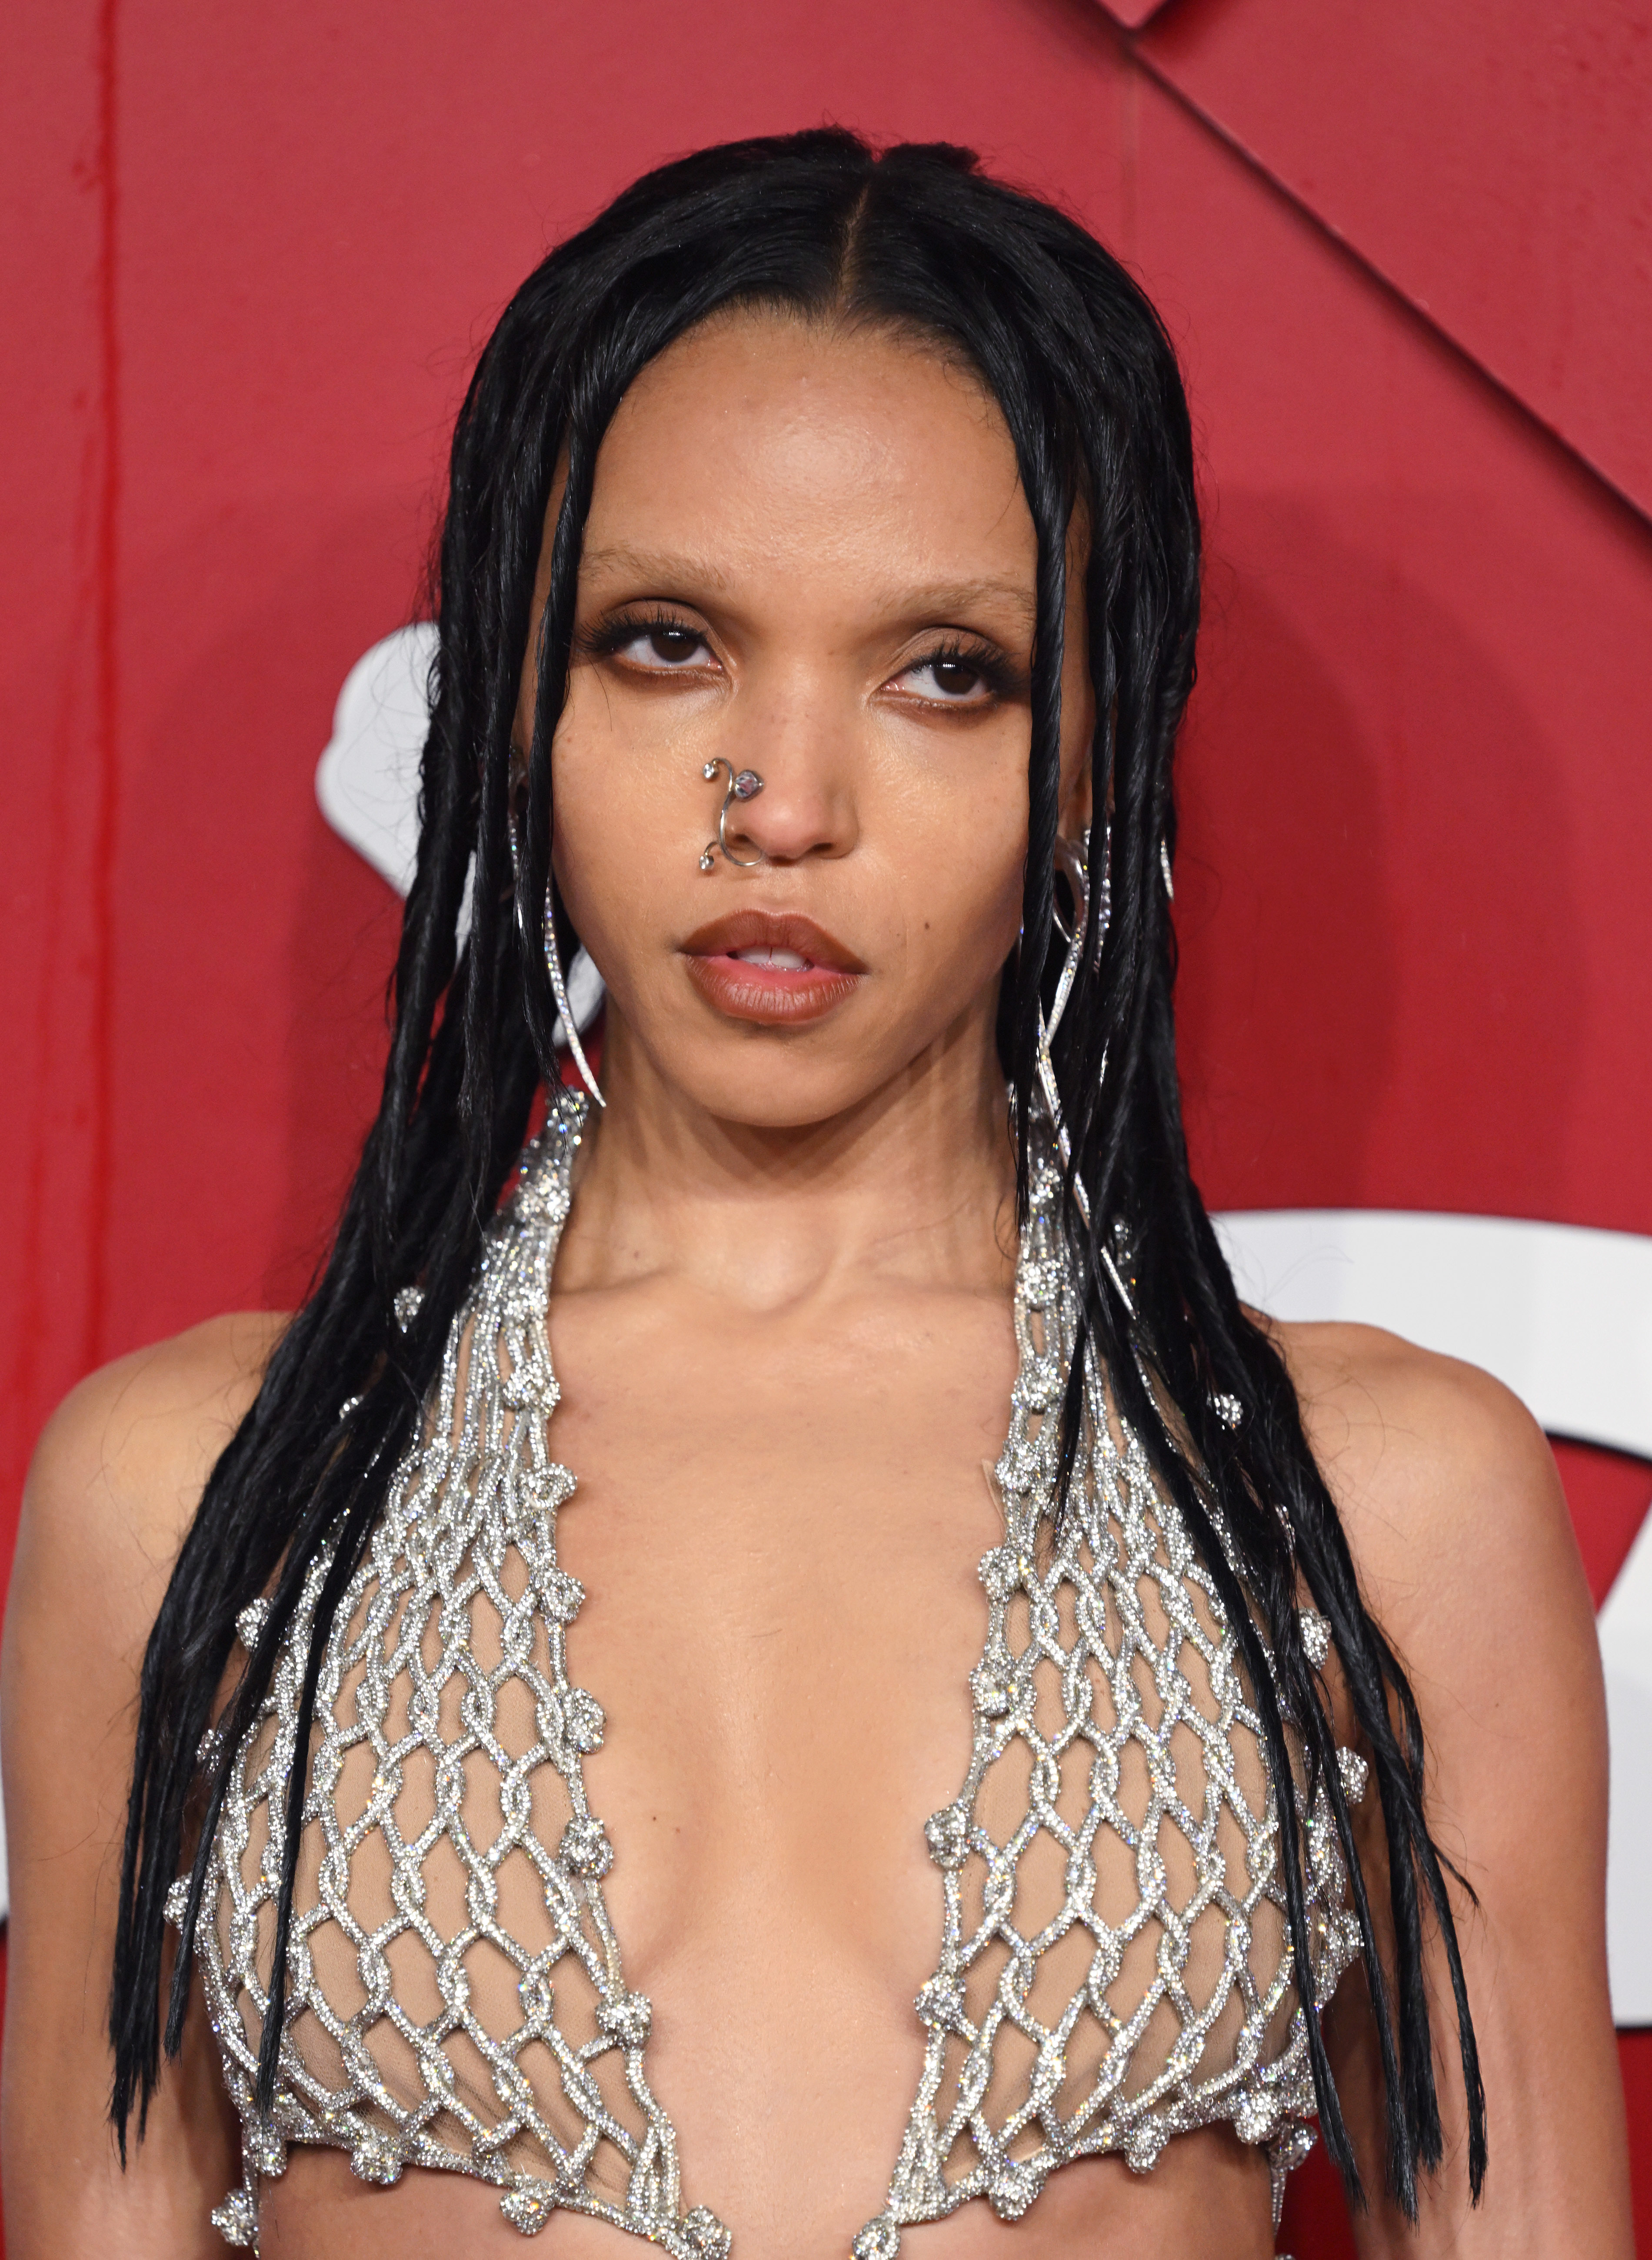 Twigs with long dark hair, wearing a chainmail top, on a red carpet